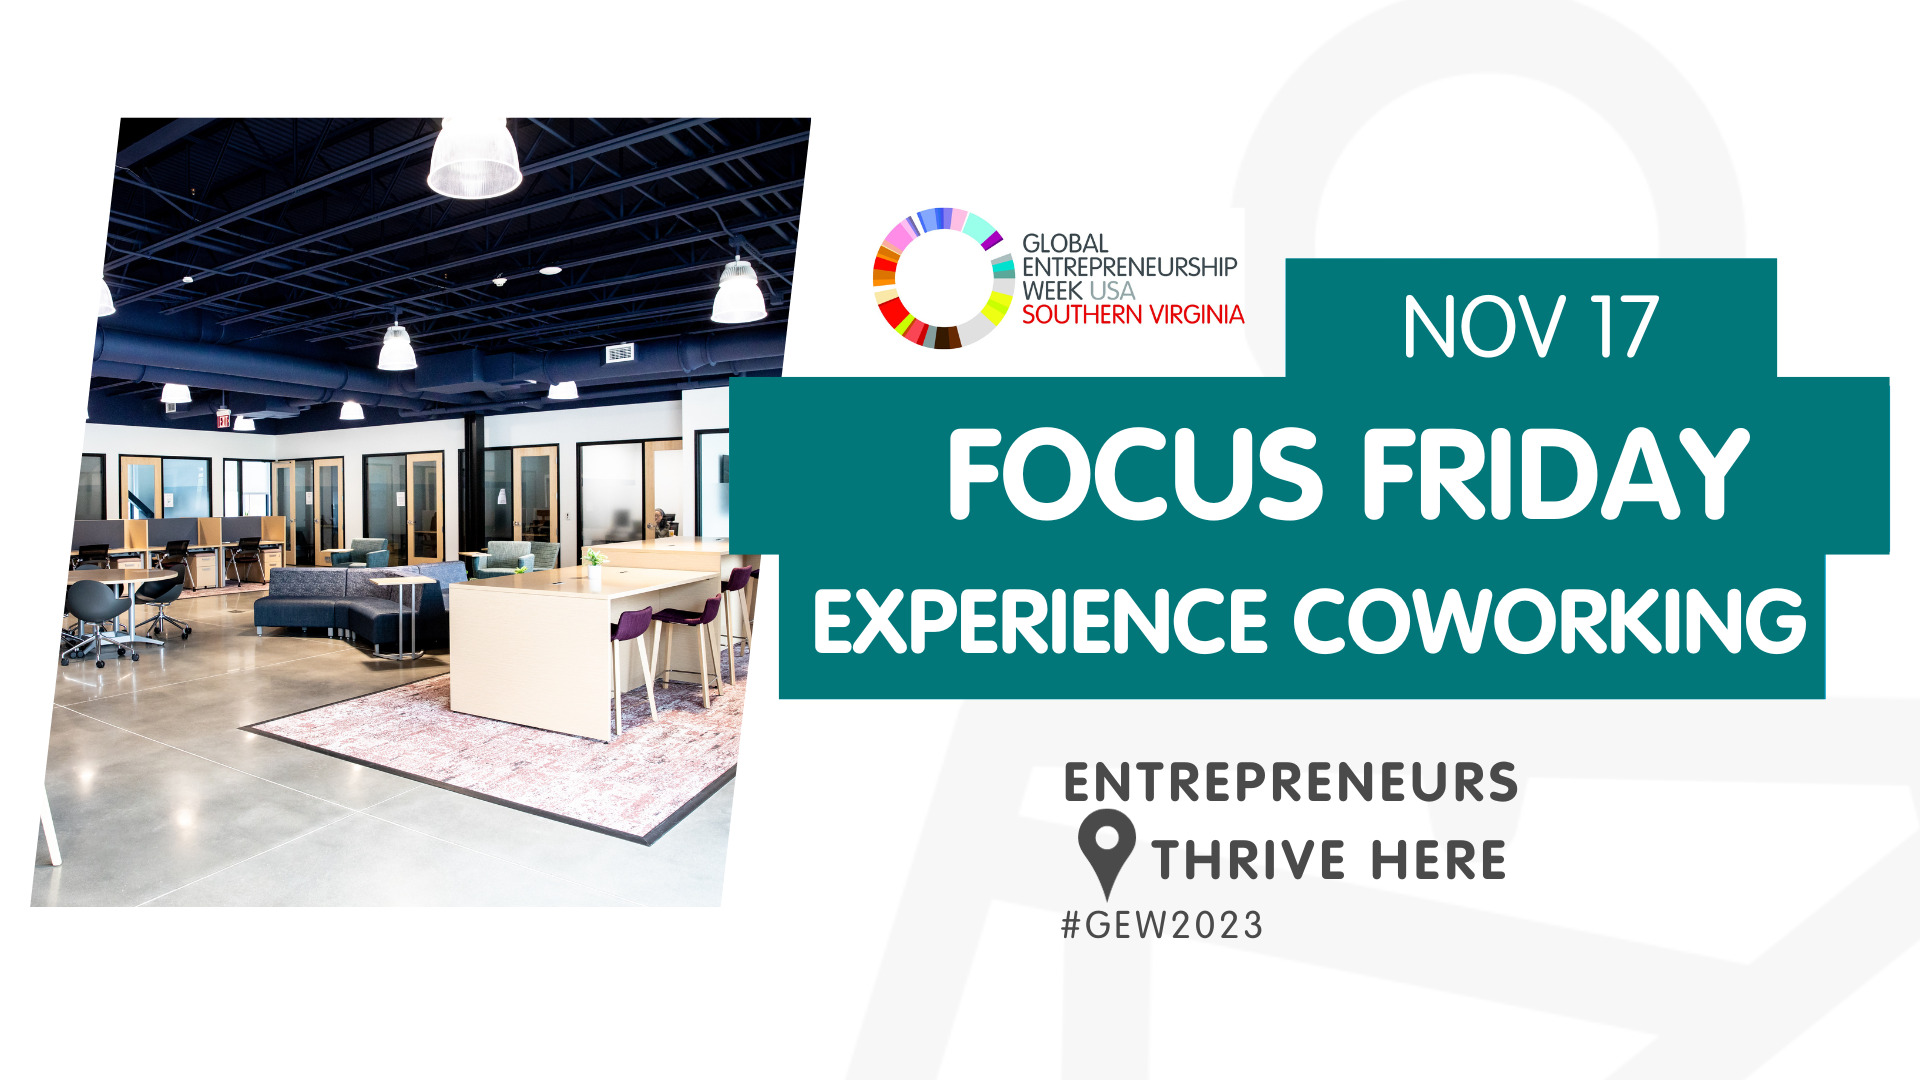 Focus Friday: Experience Coworking at SOVA Innovation Hub